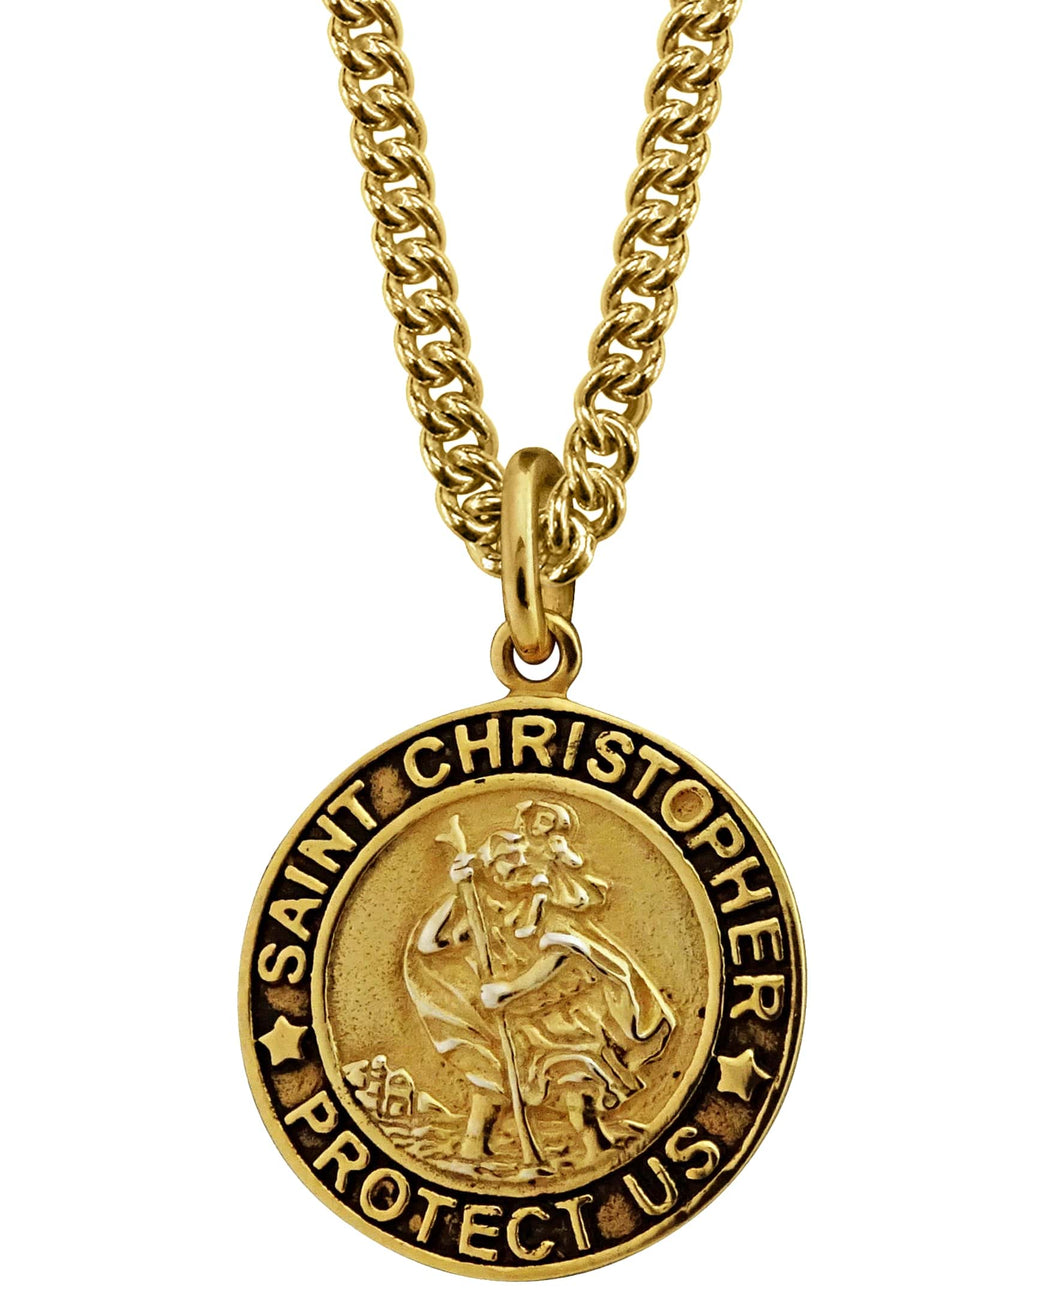 Sutton Gold Plated Sterling Silver Saint Christopher Pendant Necklace